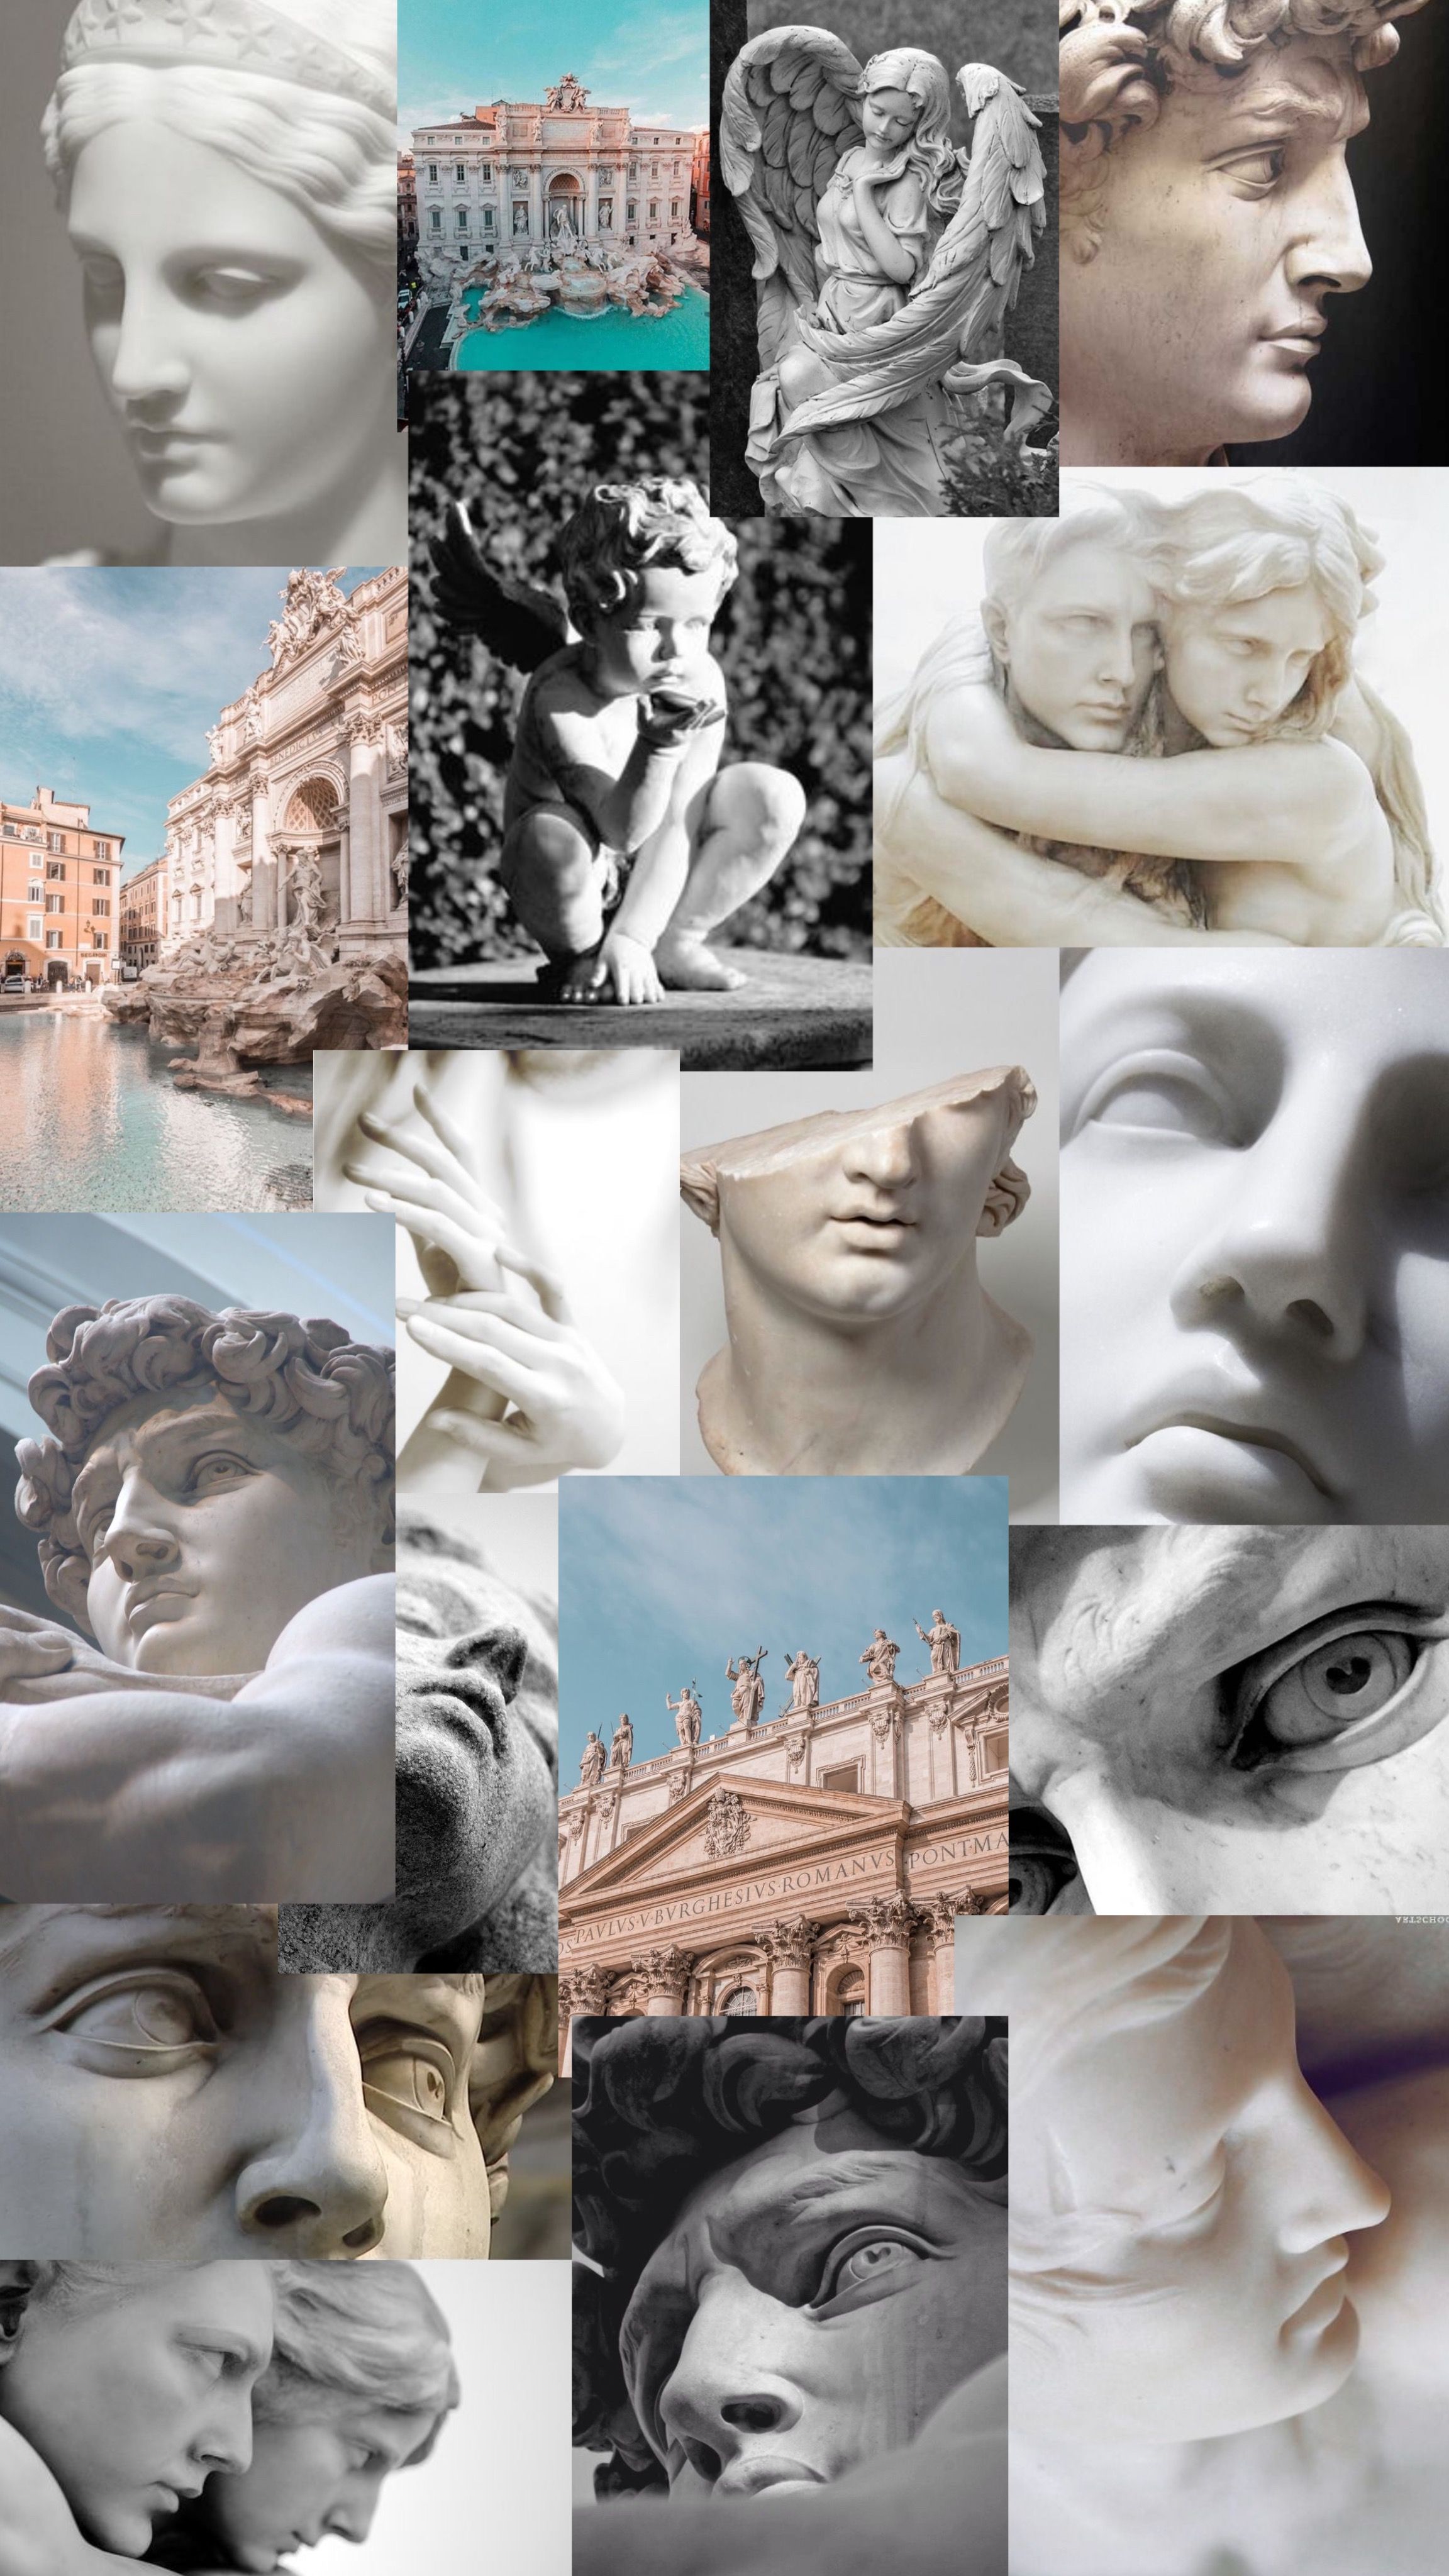 Sculptures Aesthetic Collage and Wallpaper. Statue of david wallpaper, Aesthetic collage, Greek sculpture